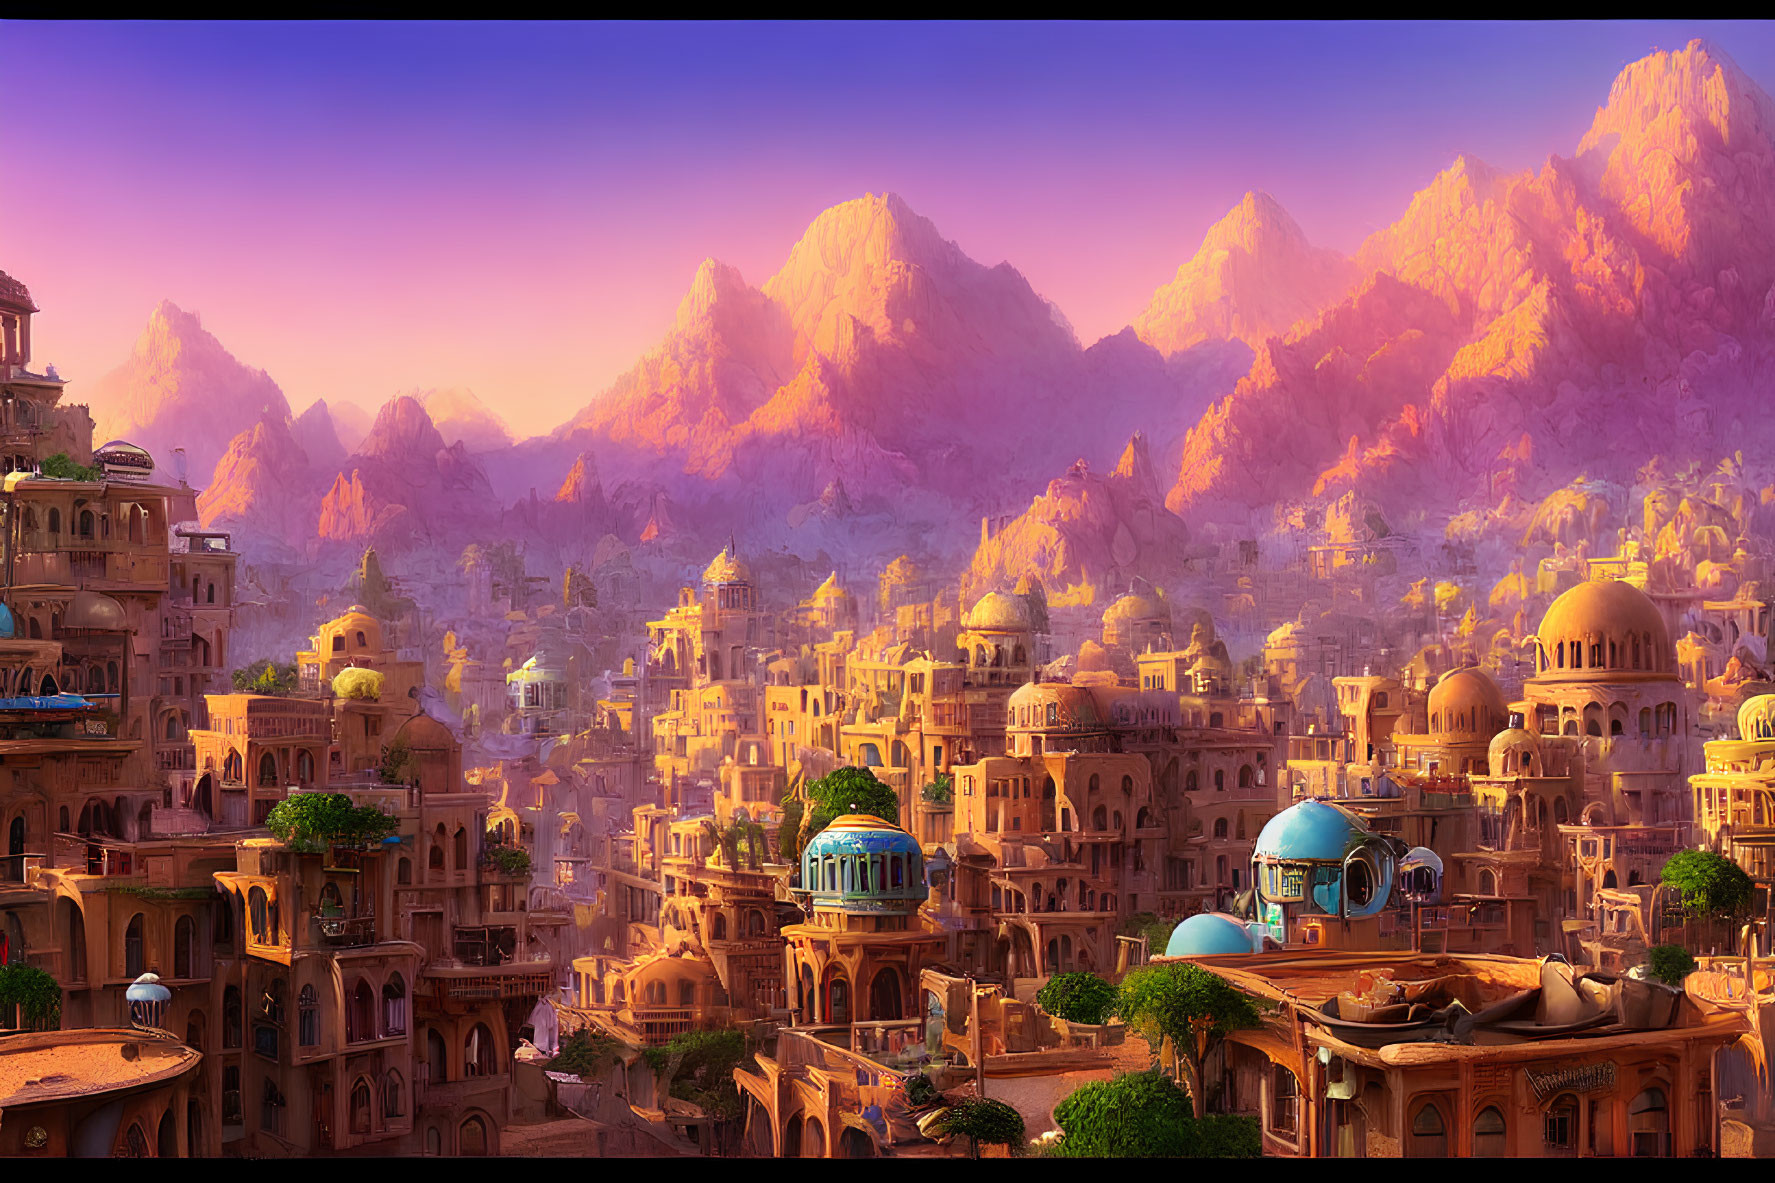 Sunset Fantasy Cityscape with Golden Buildings and Purple Mountains